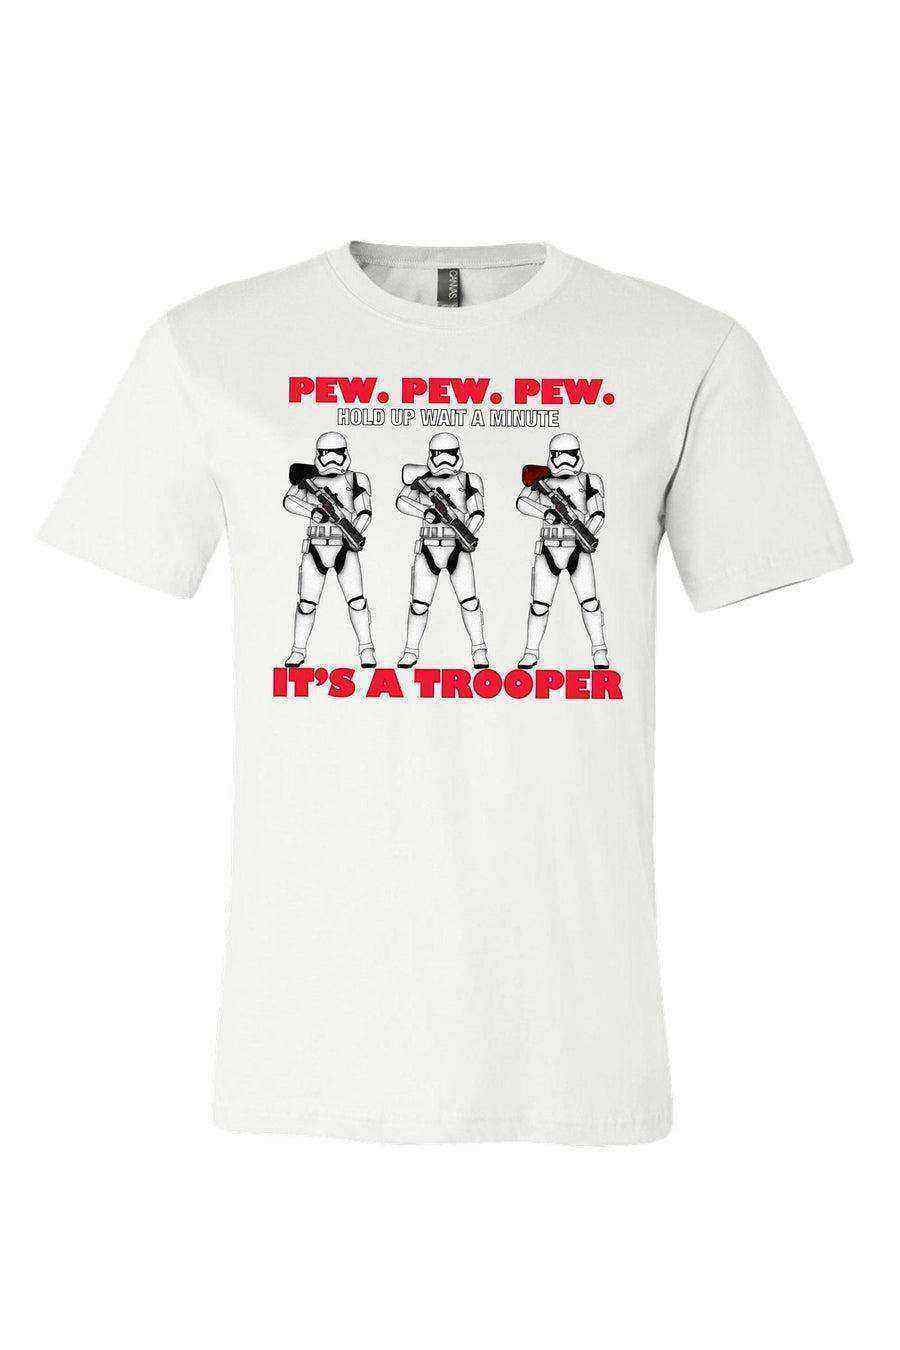 Toddler | Pew Pew Pew It’s A Trooper Shirt | Storm Trooper Shirt | Star Wars - Dylan's Tees